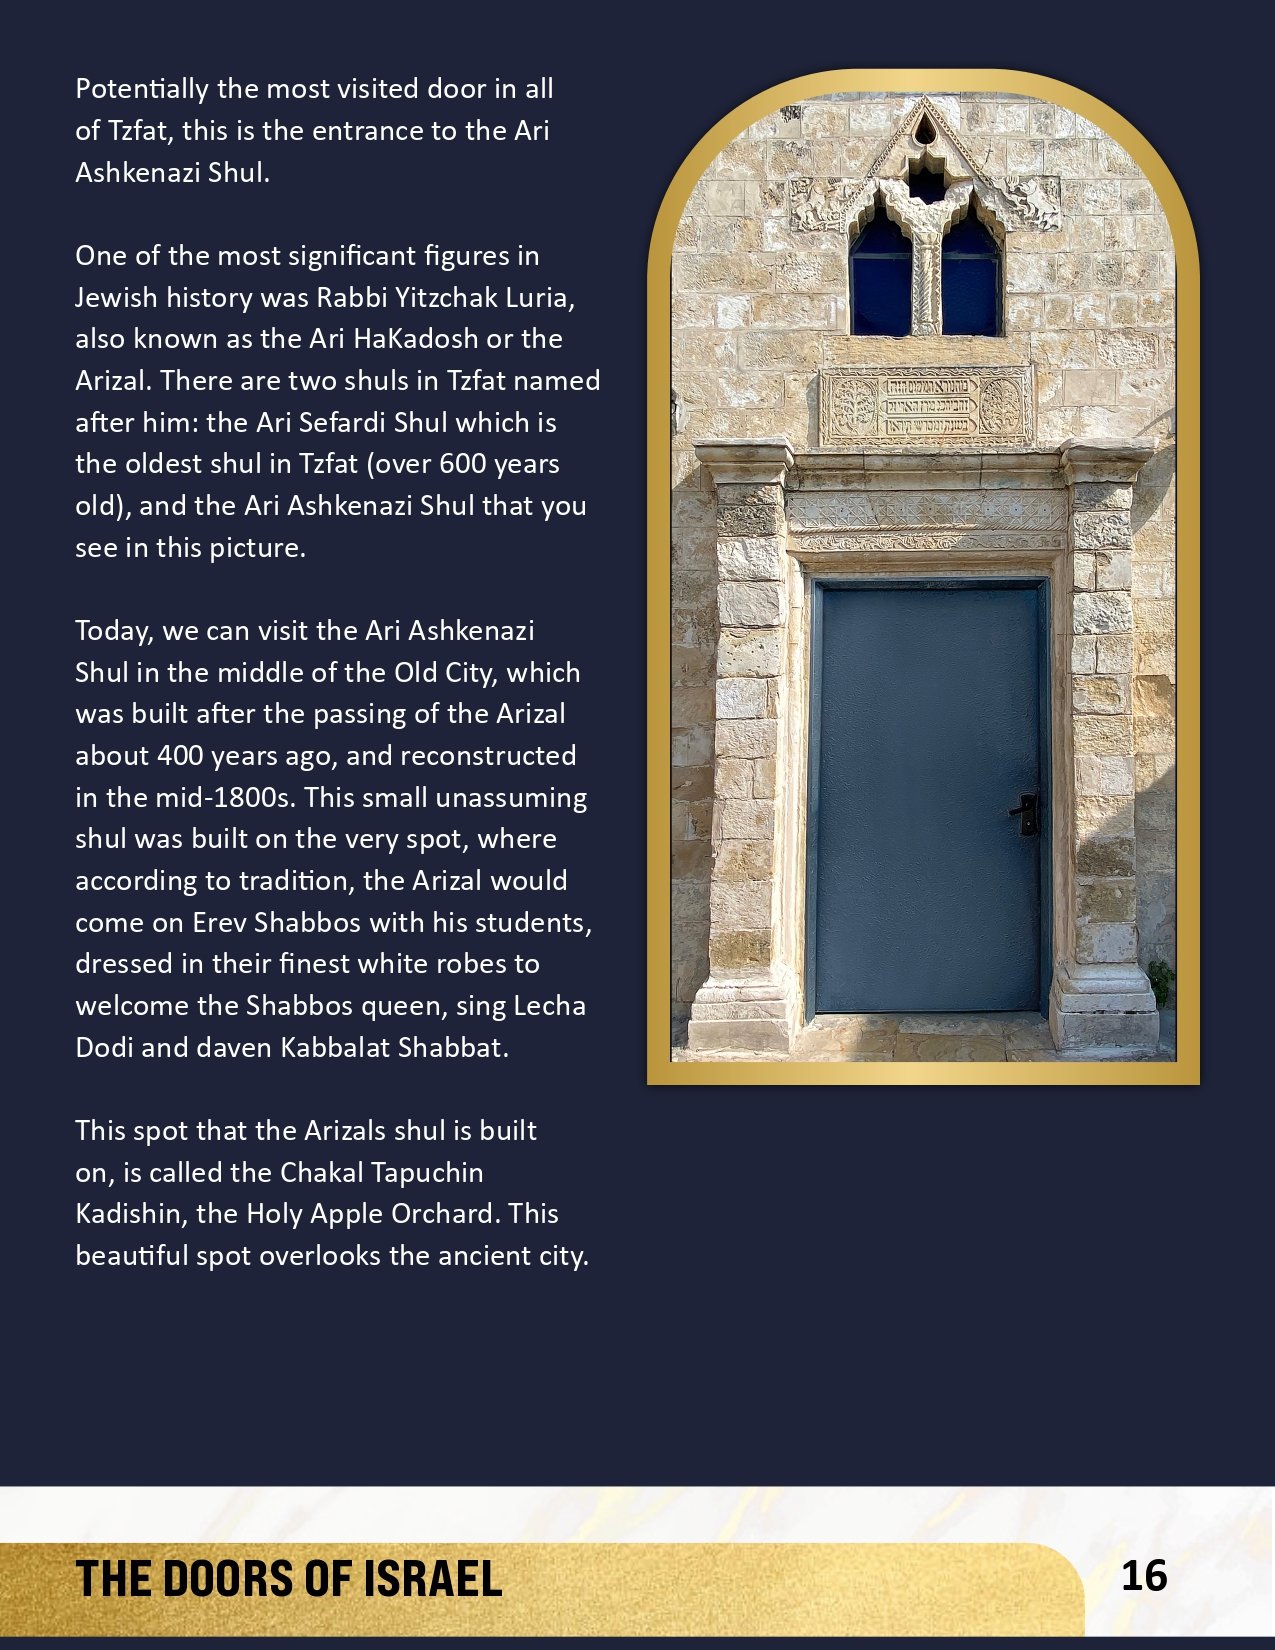 THE DOORS OF ISRAEL-6 INSIDE TEXT-16_page-0001.jpg